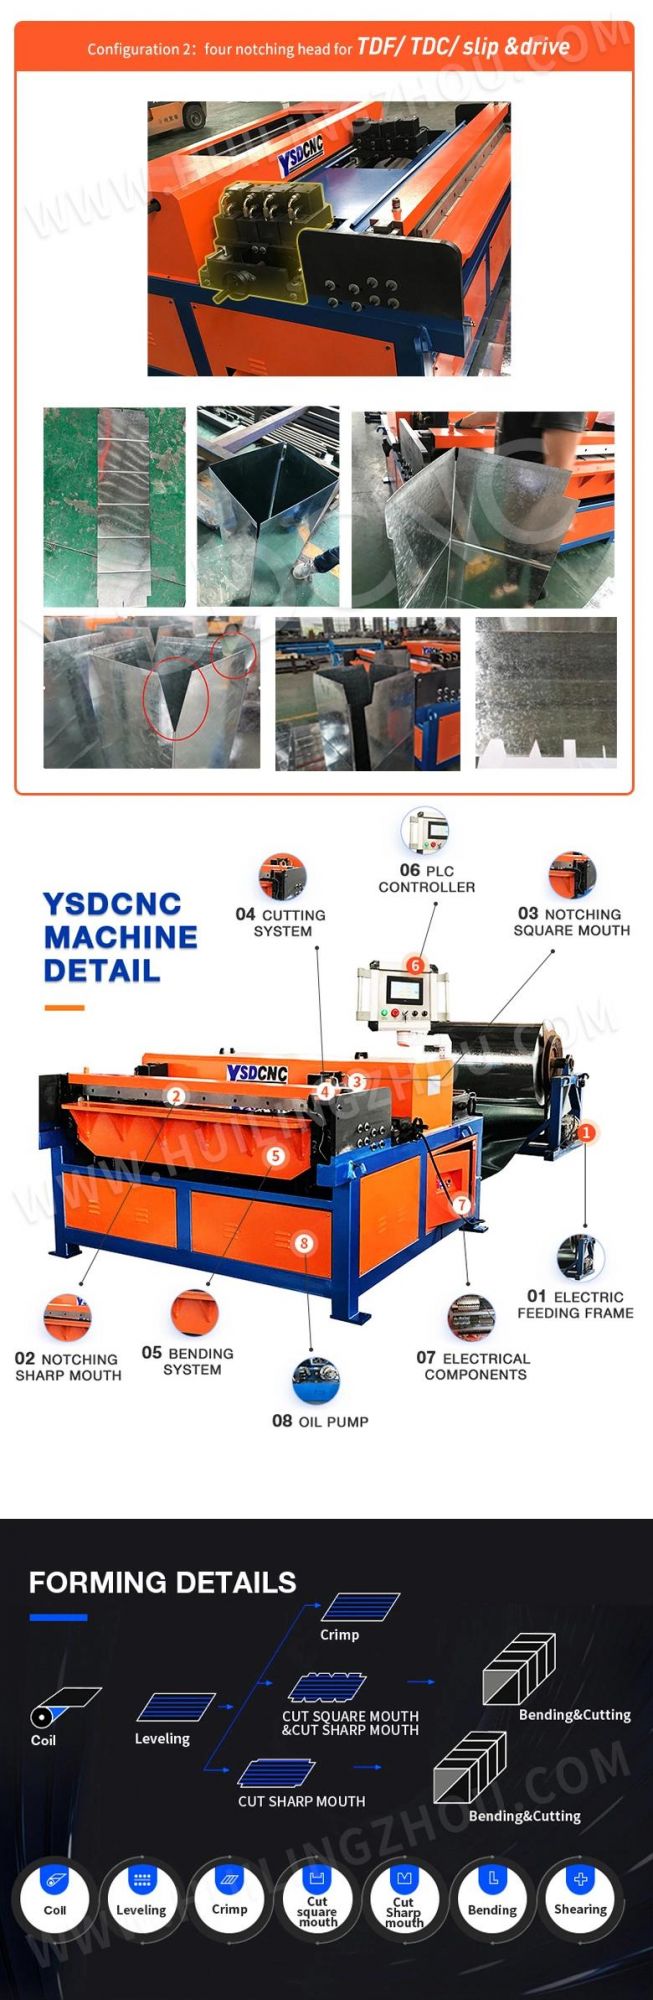 Ysdcnc Brand Square Duct Making Machine, HVAC Auto Duct Line 3 with High Production